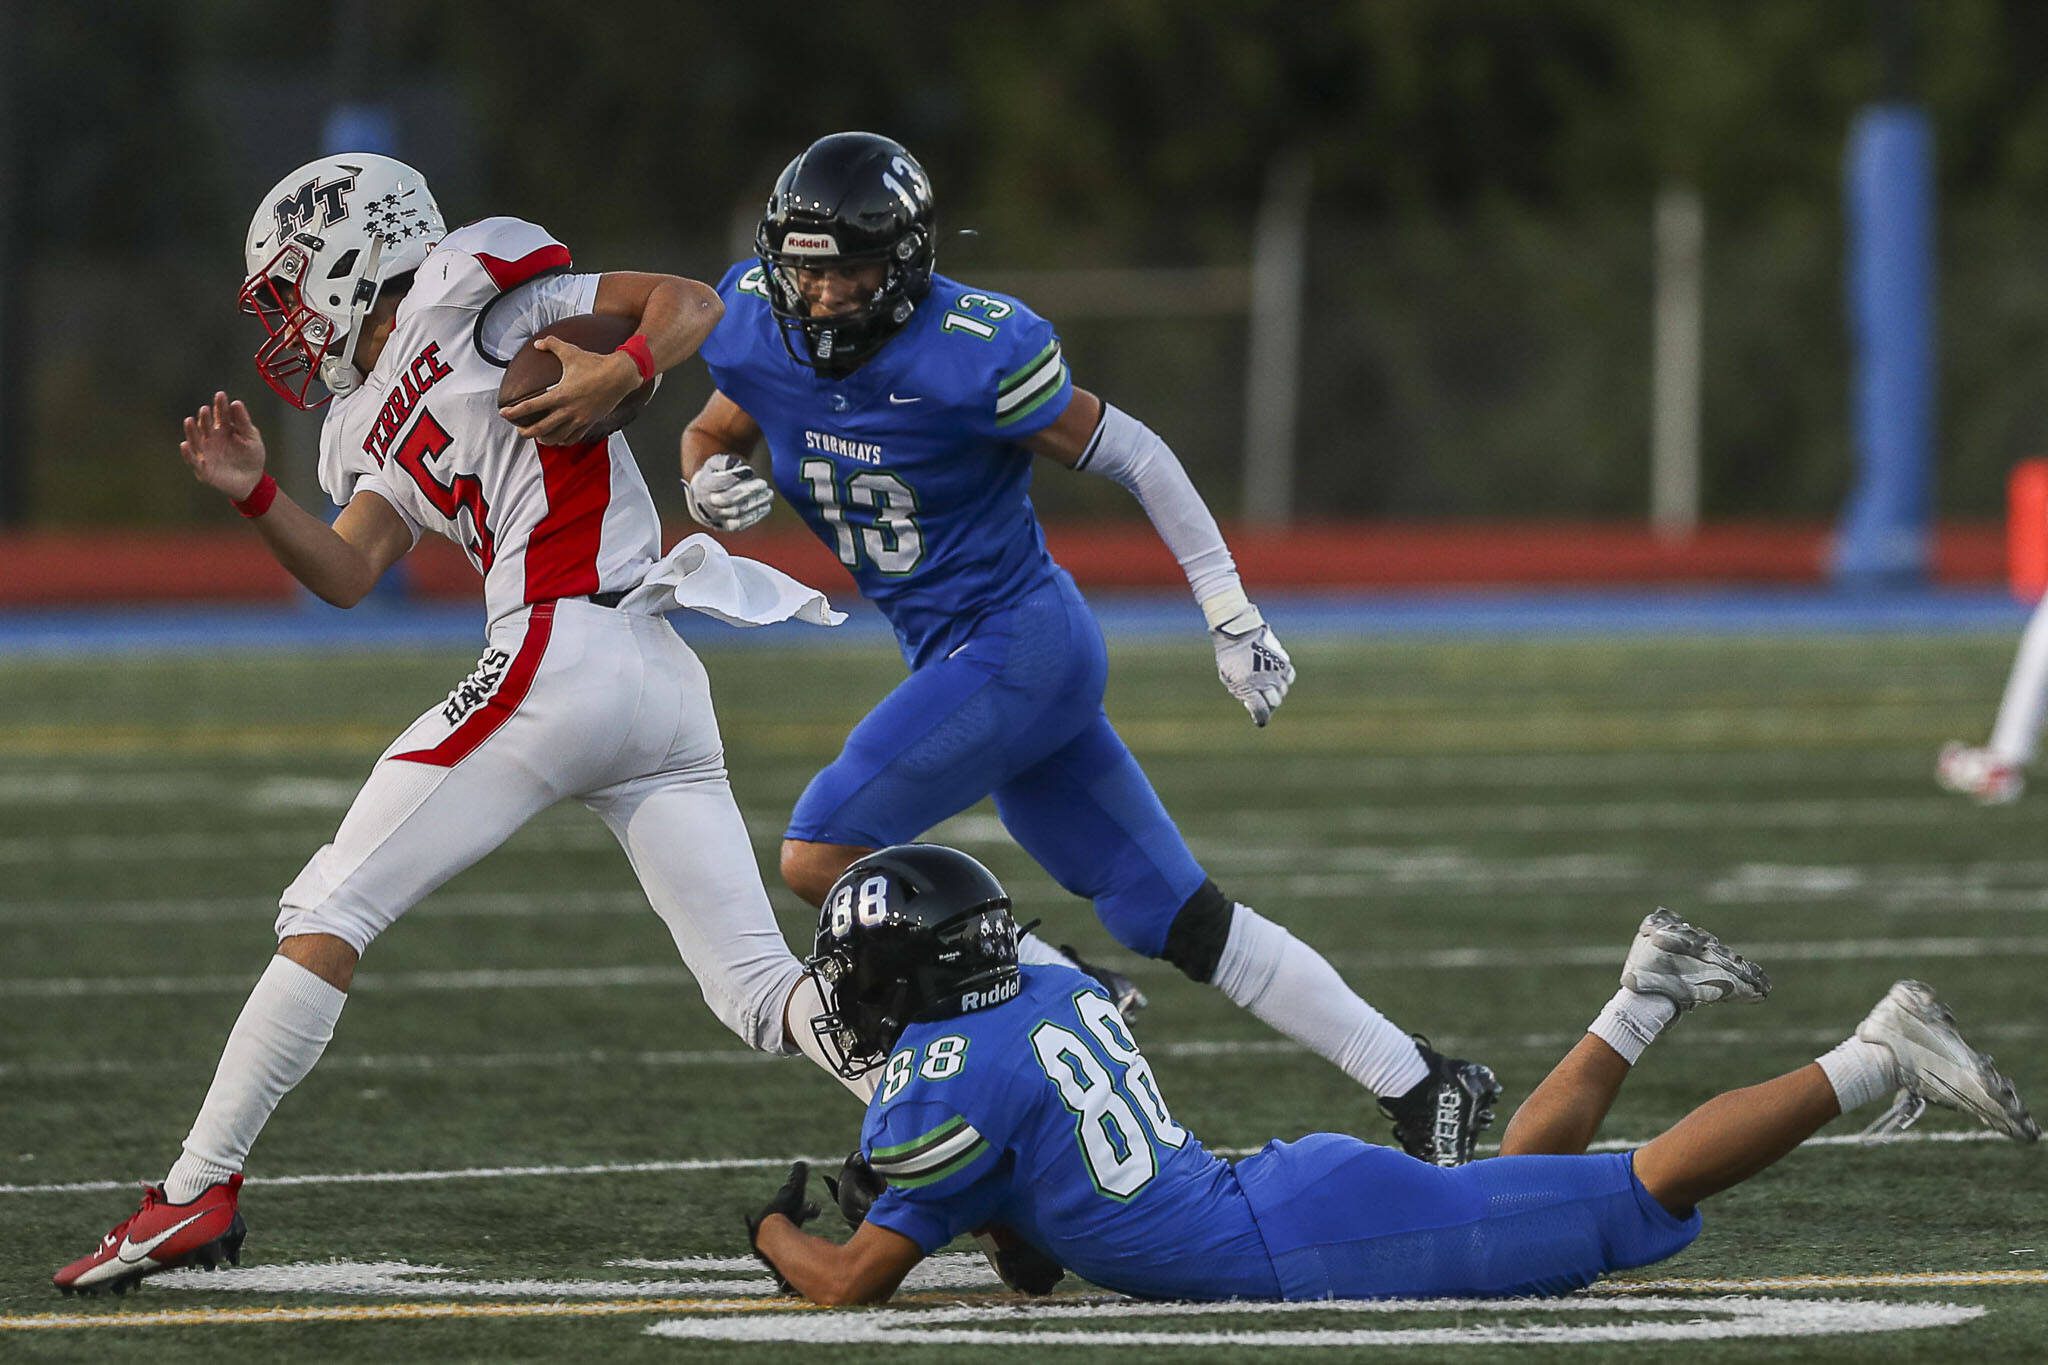 Mountlake Terrace’s Arian Motaghedi (5) runs with the ball during a football game between Mountlake Terrace and Shorewood at Shoreline Stadium in Shoreline, Washington on Friday, Sept. 15, 2023. Mountlake Terrace won, 35-0. (Annie Barker / The Herald)